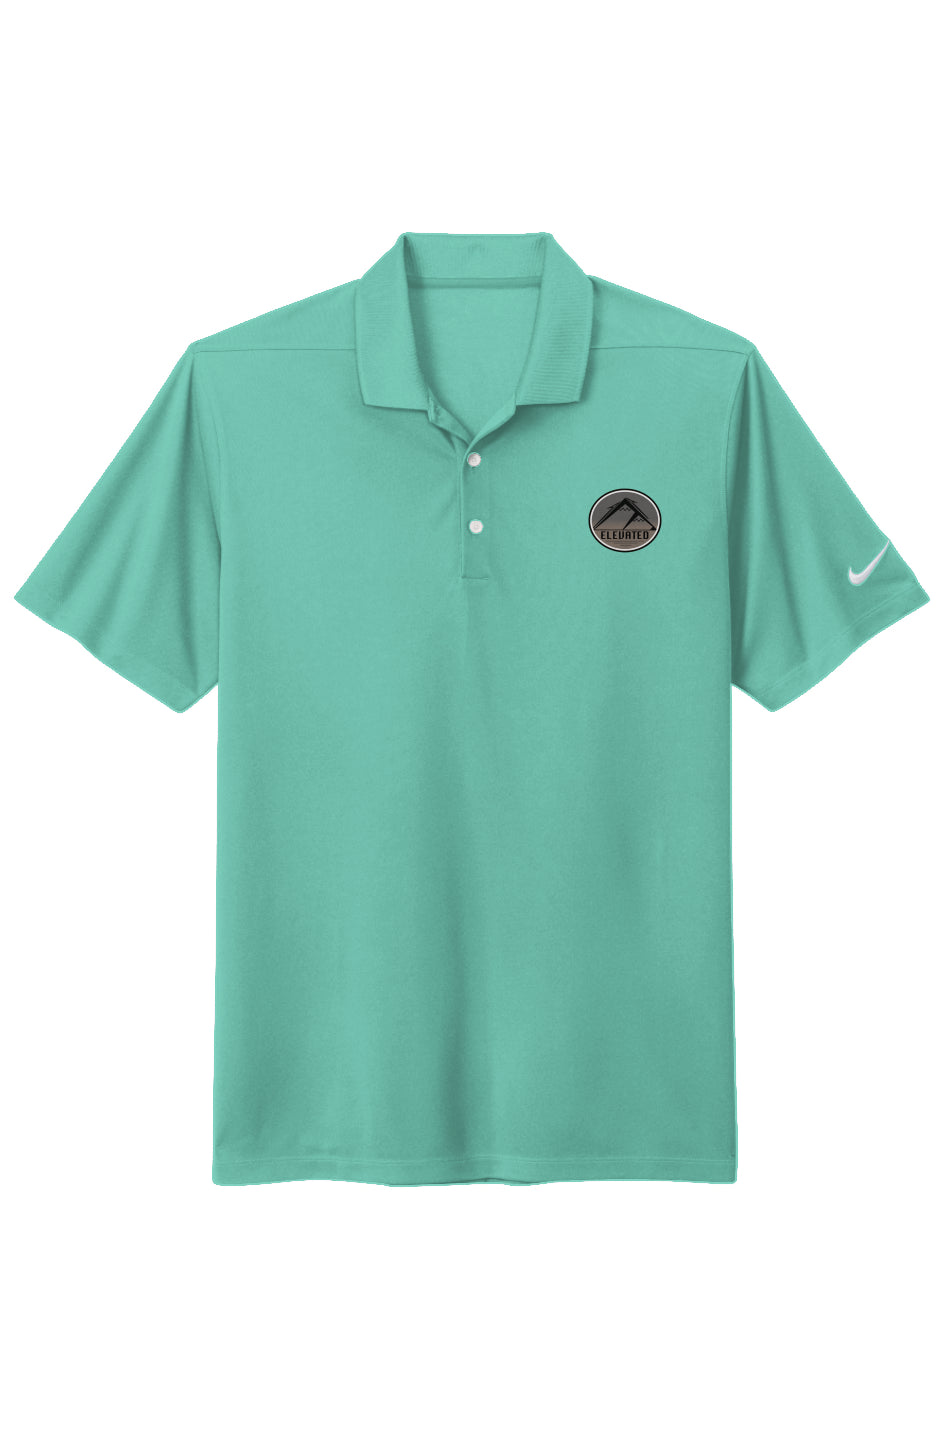 Embroidered Elevated Nike Dri-FIT Micro Pique 2.0 Polo